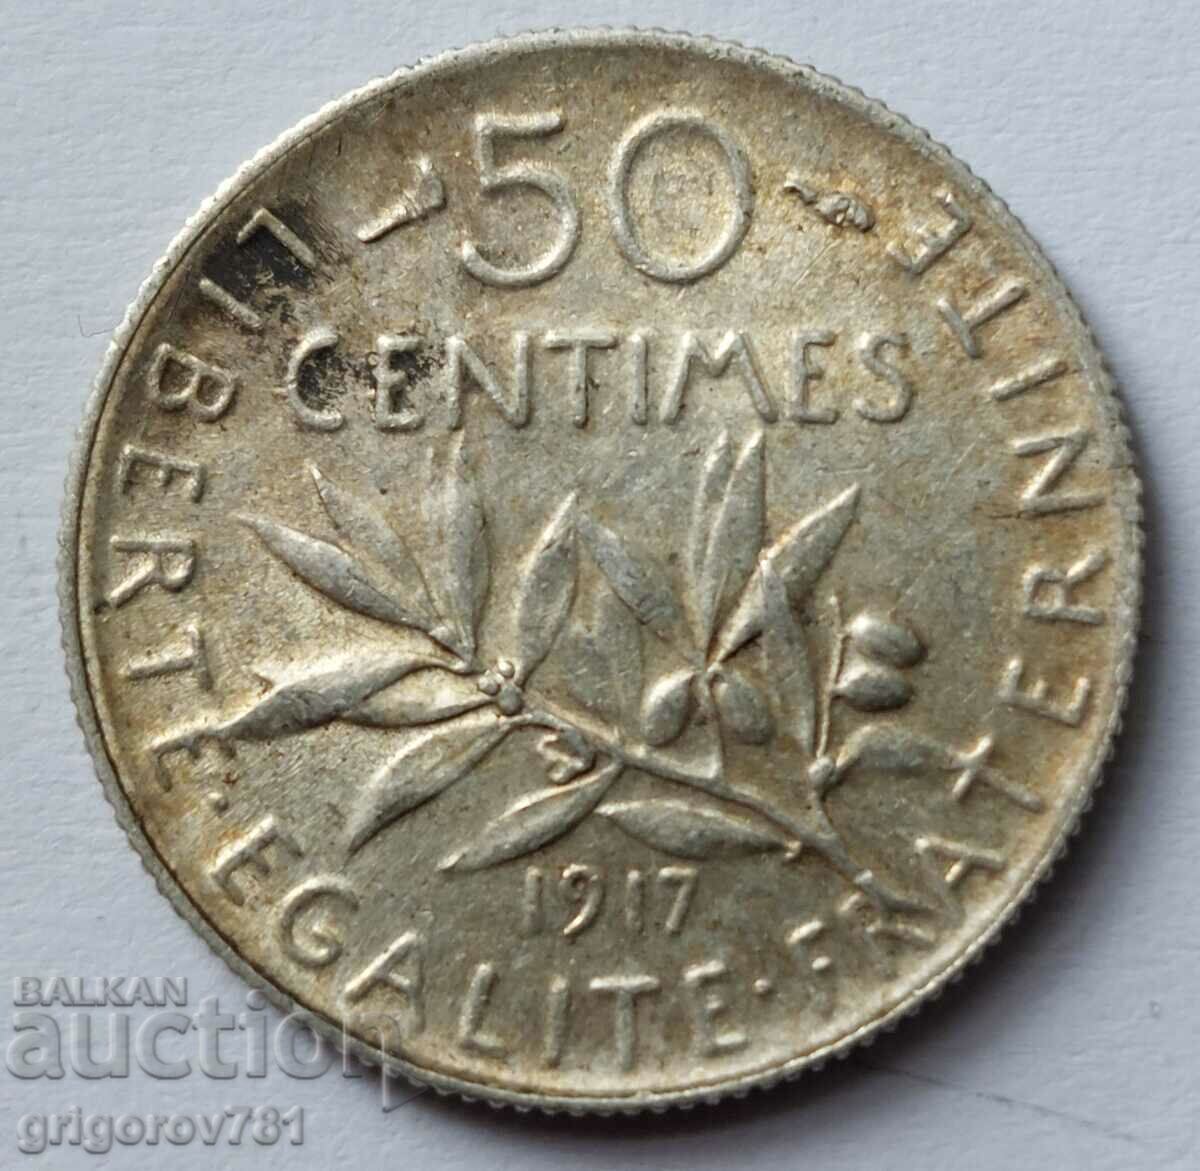 50 centimes silver France 1917 - silver coin №17